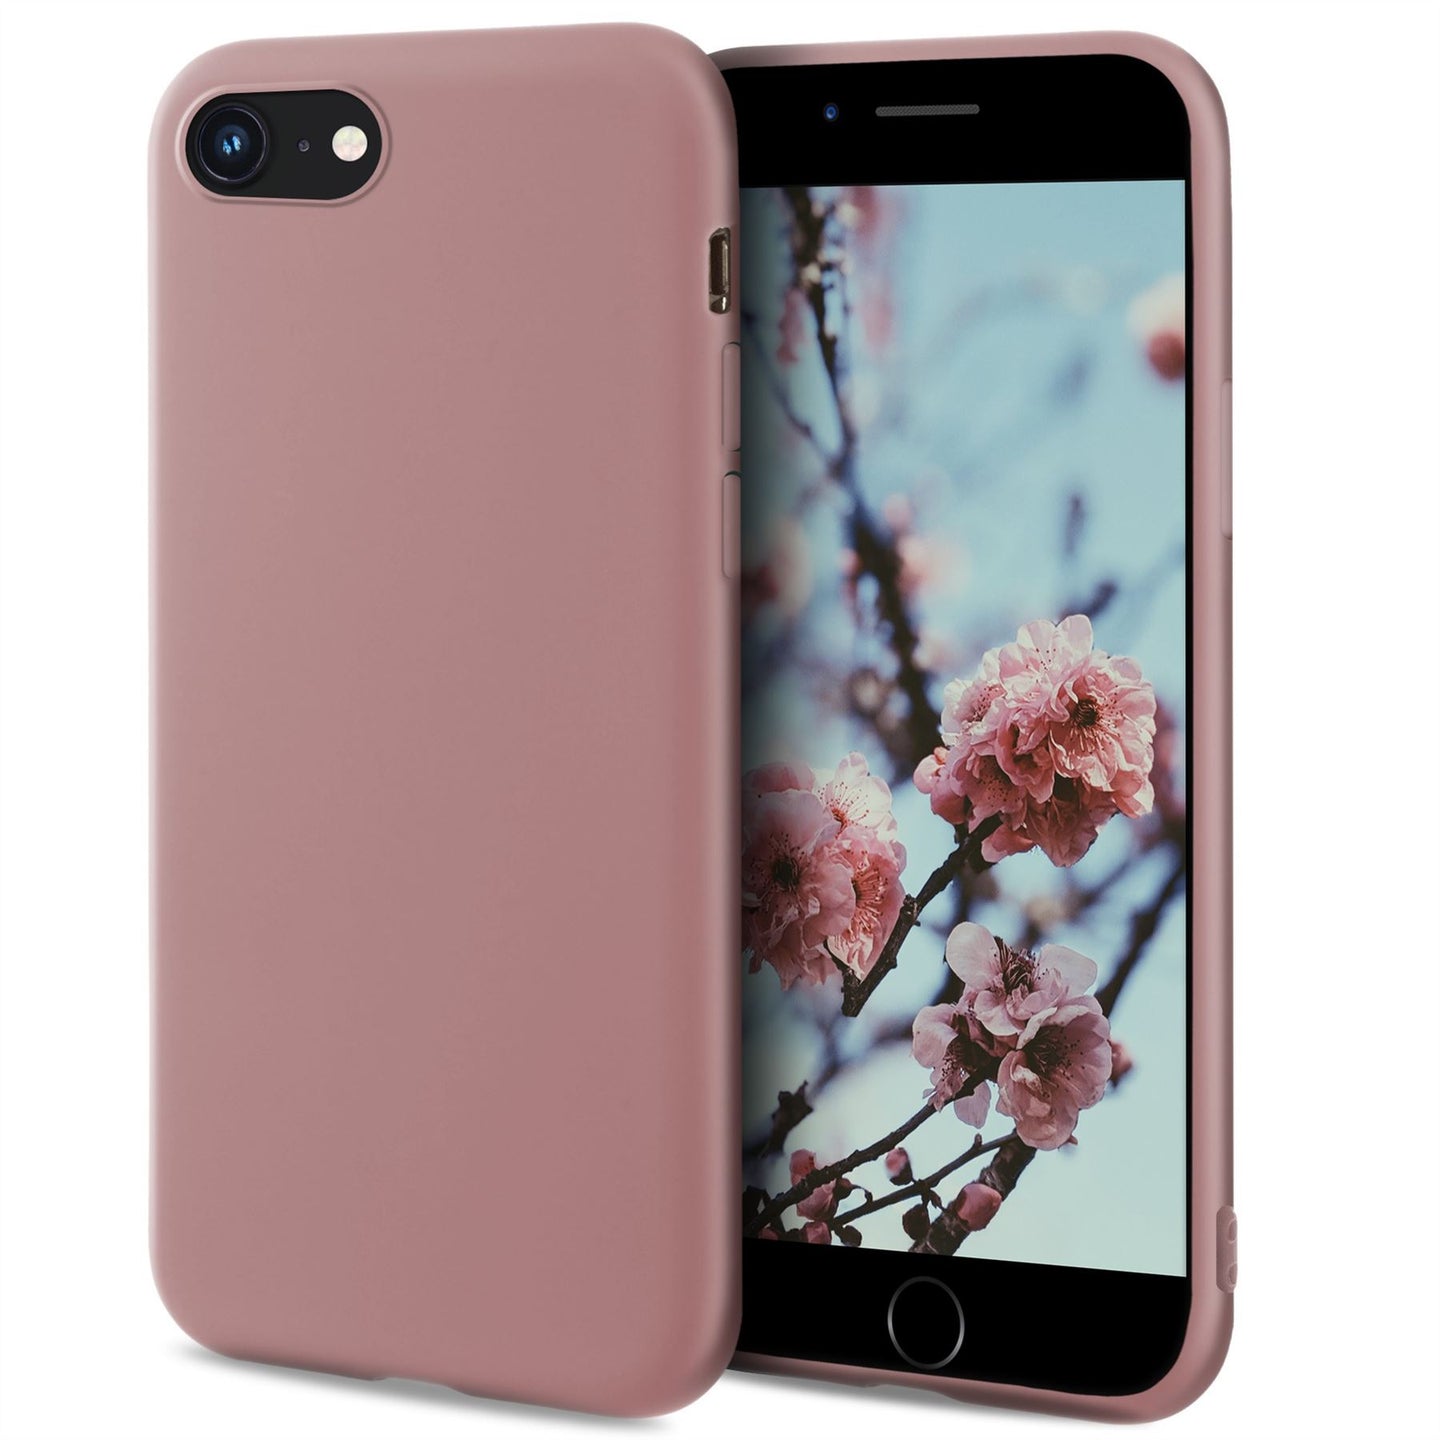 Moozy Minimalist Series Silicone Case for iPhone SE 2020, iPhone 8 and iPhone 7, Rose Beige - Matte Finish Slim Soft TPU Cover